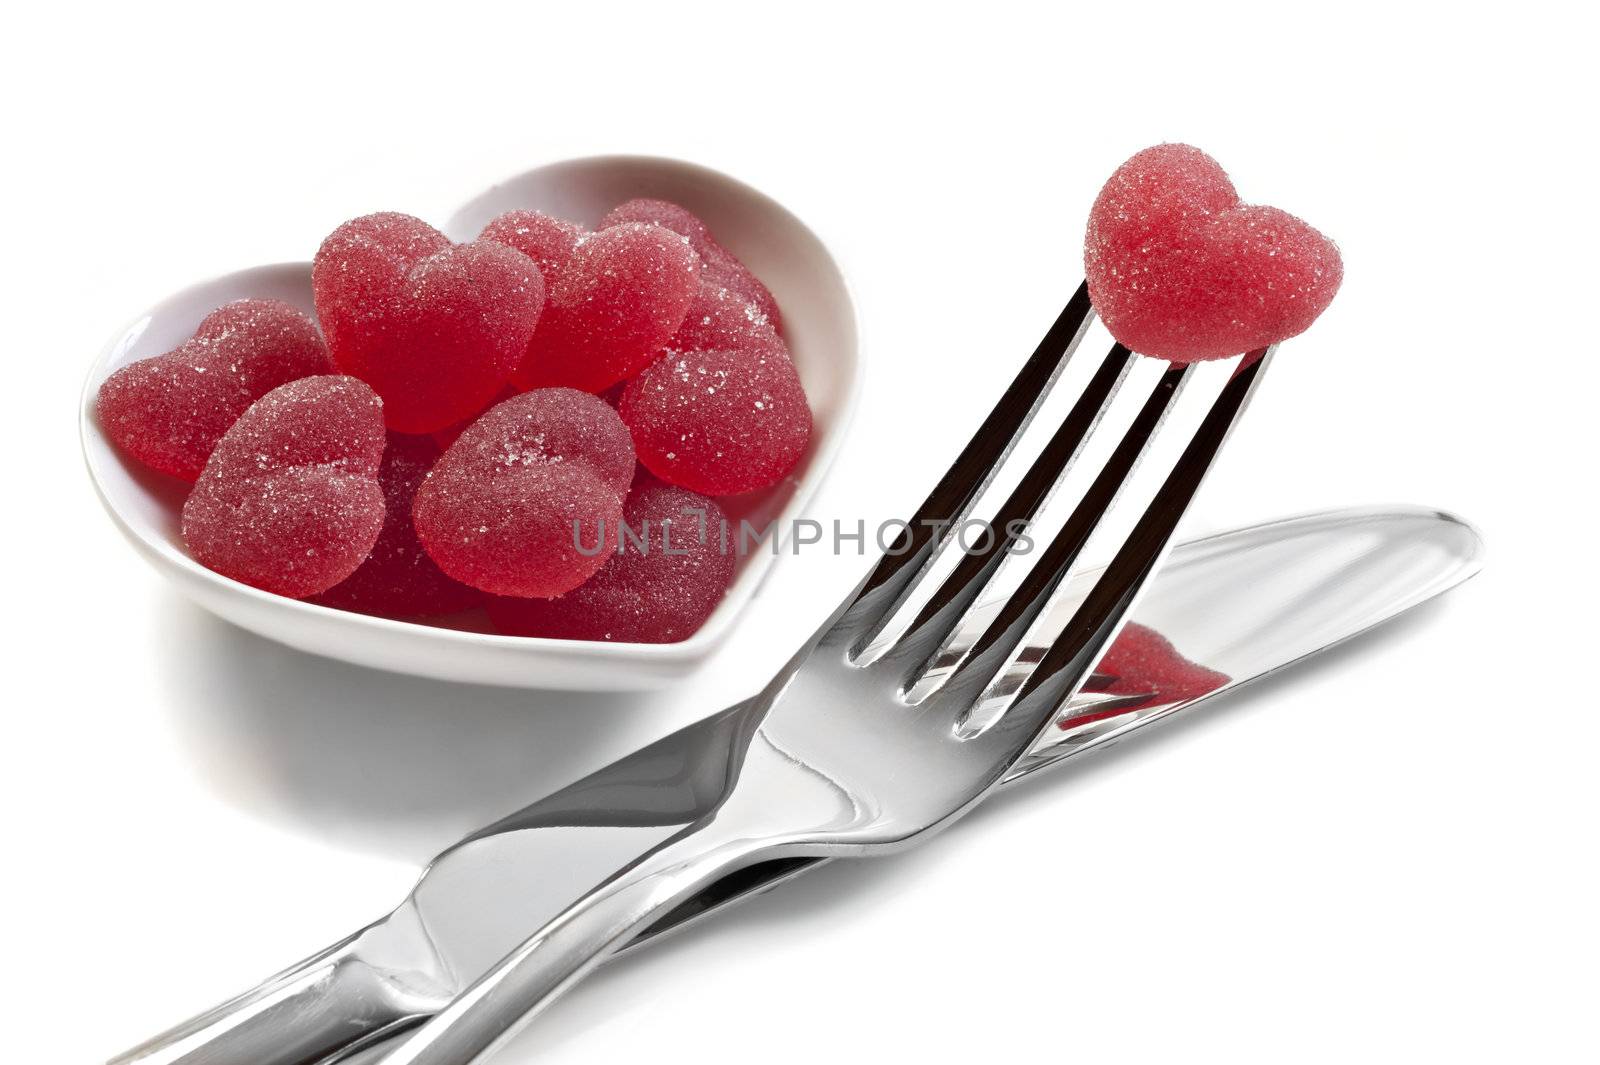 Red heart shaped jelly sweets with knife and fork on white by tish1